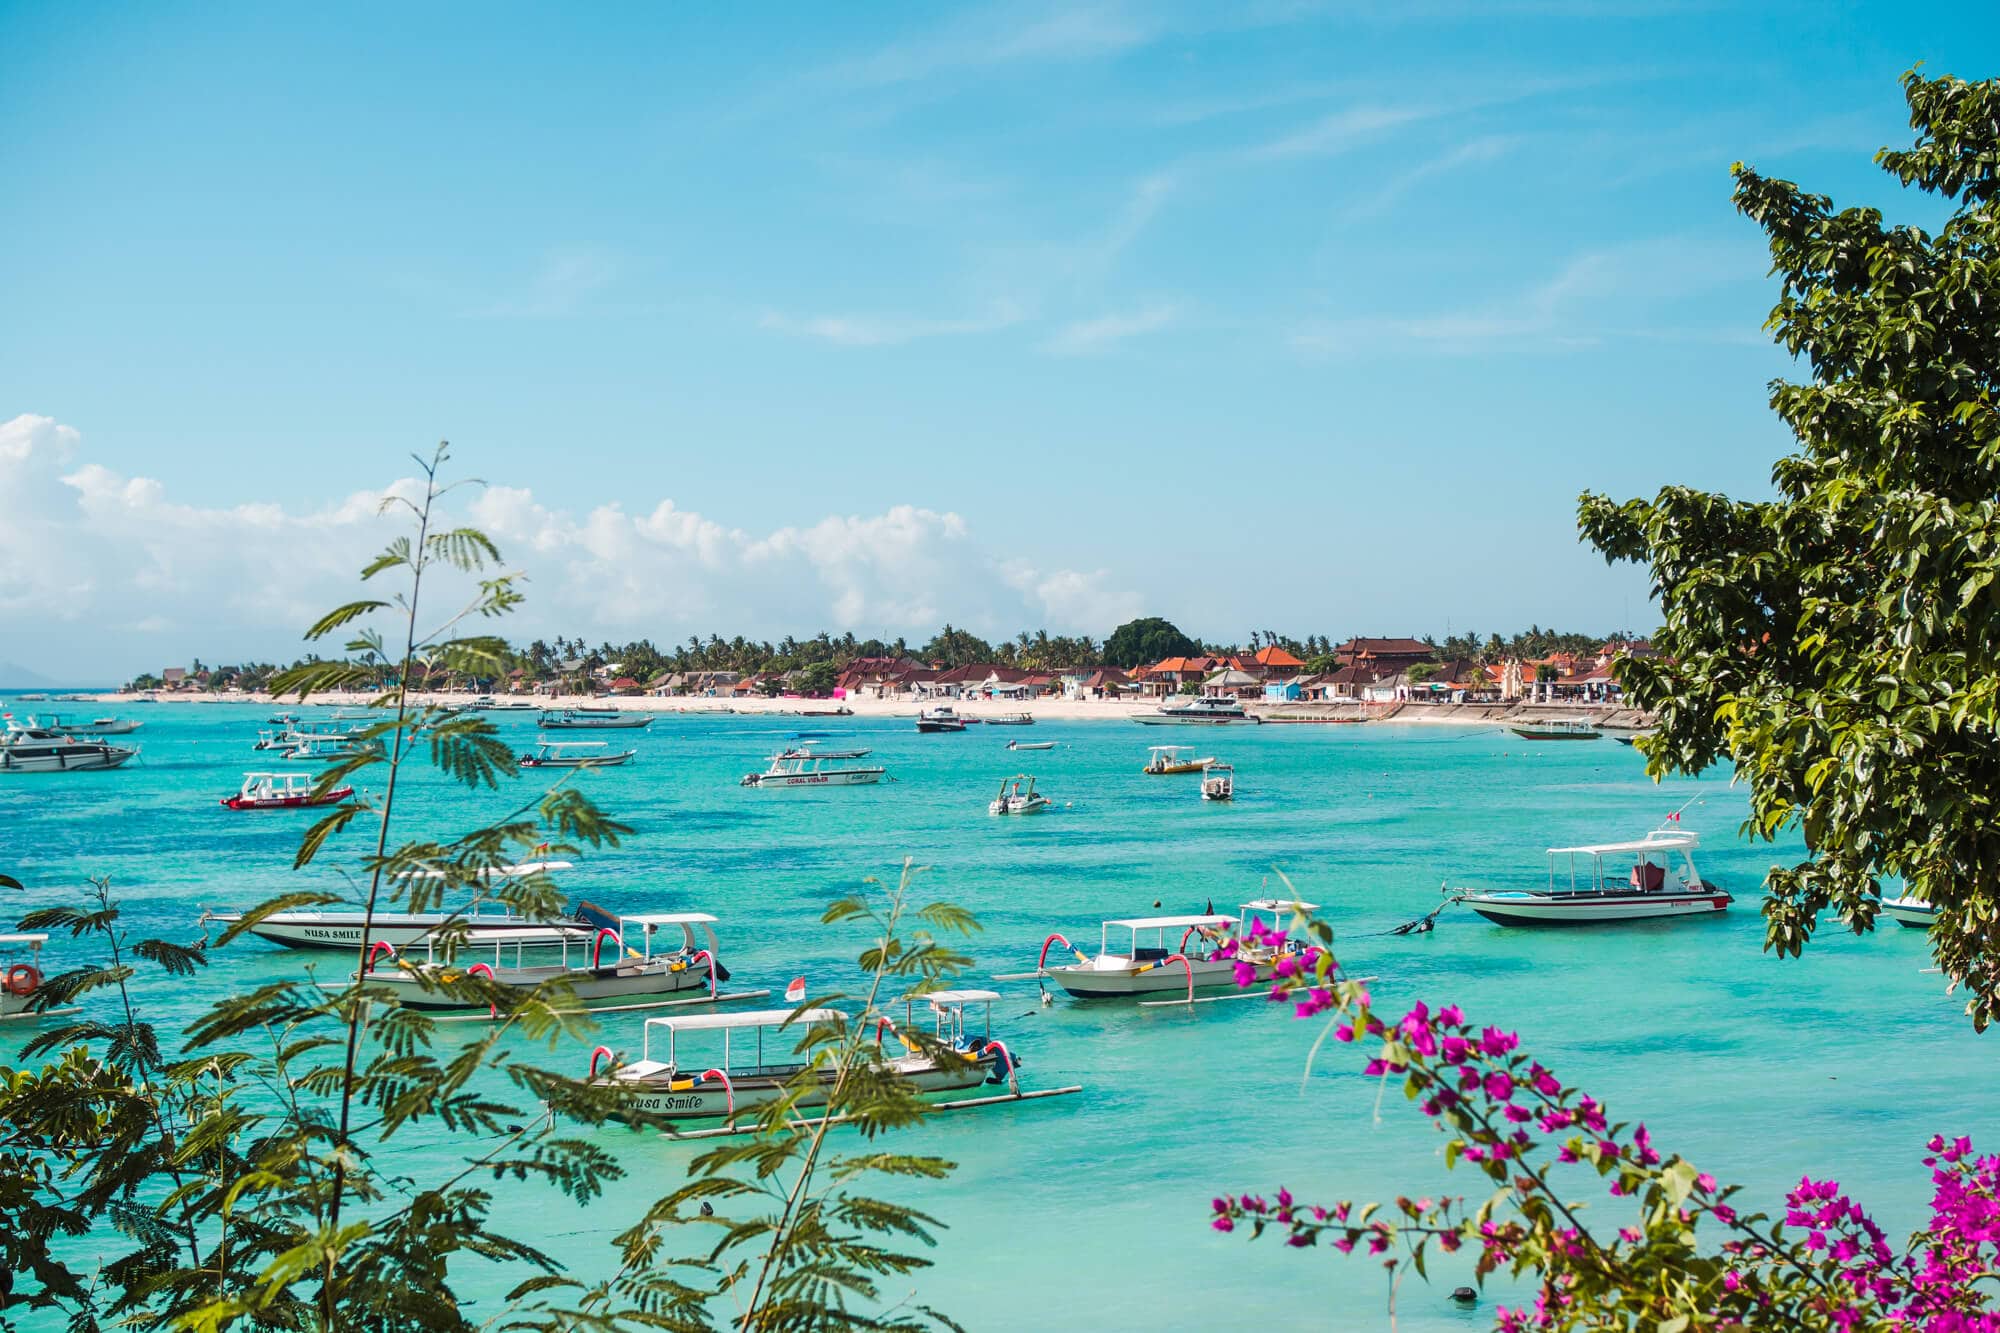 View of a turquoise bay dotted with boats and Jungut Batu Beach in the background on a day trip to Nusa Lembongan from Bali.